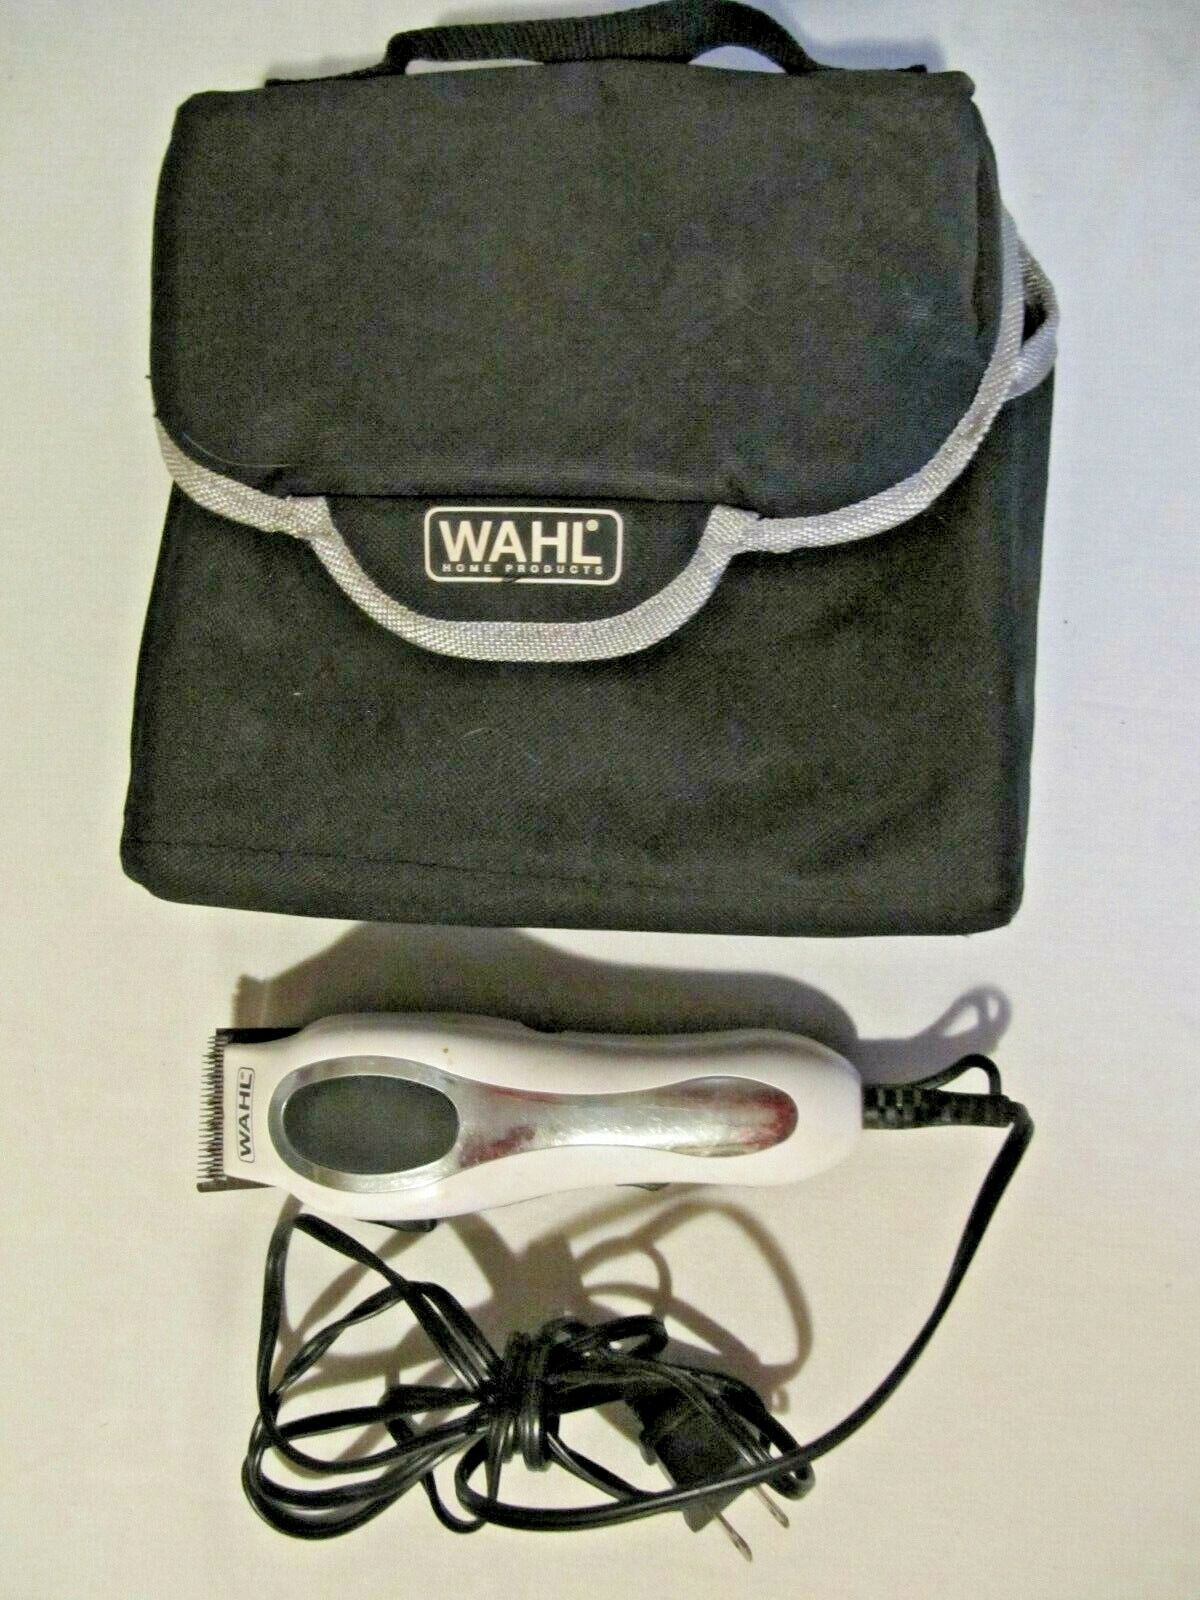 Wahl Hair Clippers With Black Carrying Storage Bag - Tested Works